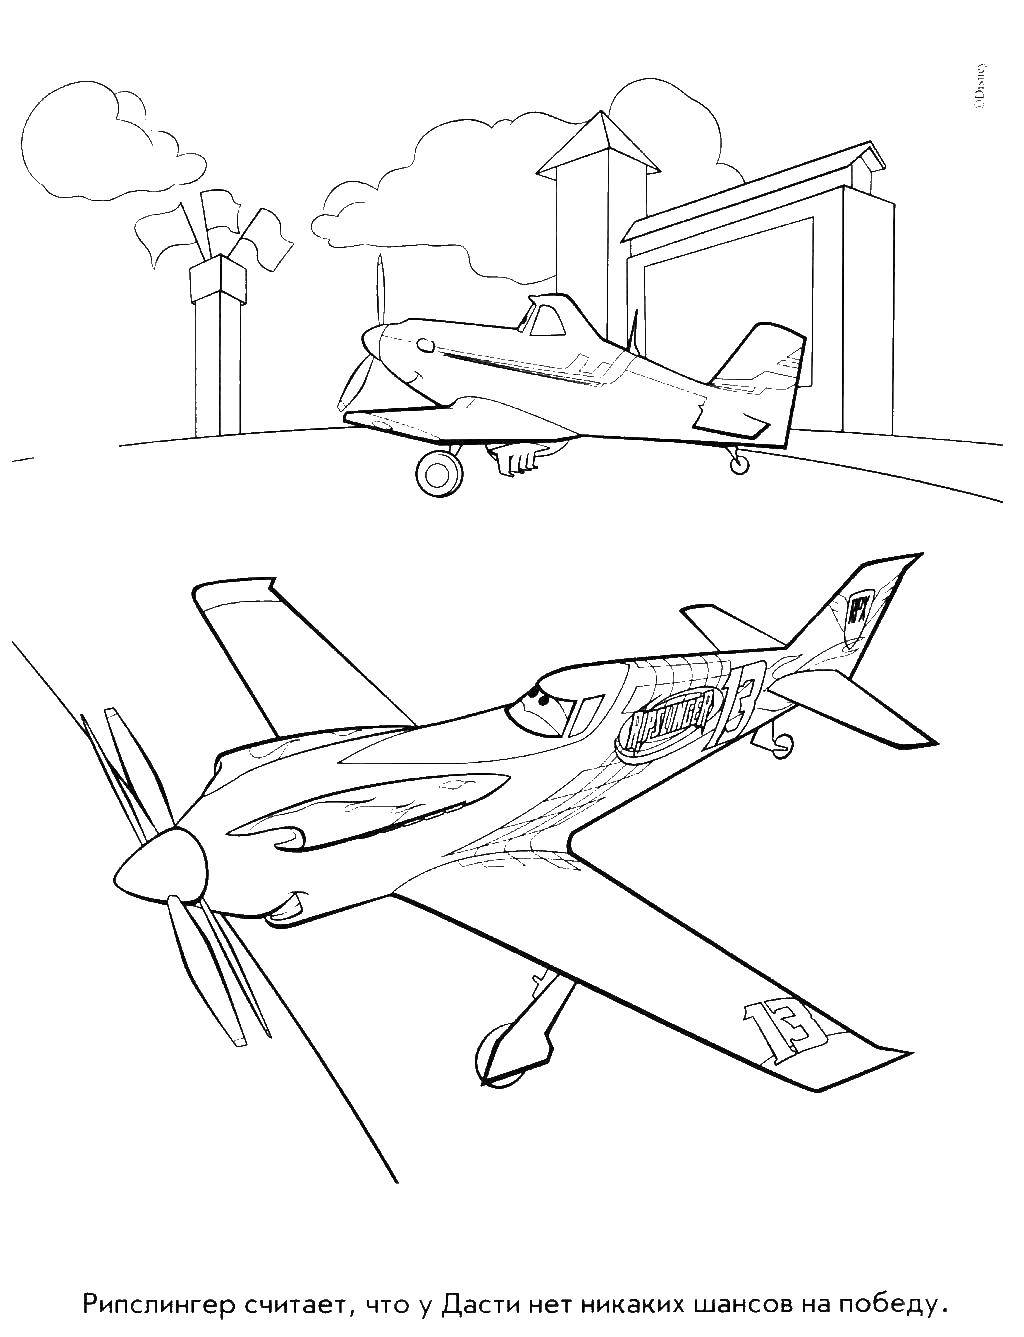 Coloring Dusty and ripslinger. Category coloring. Tags:  The Plane, Dusty.